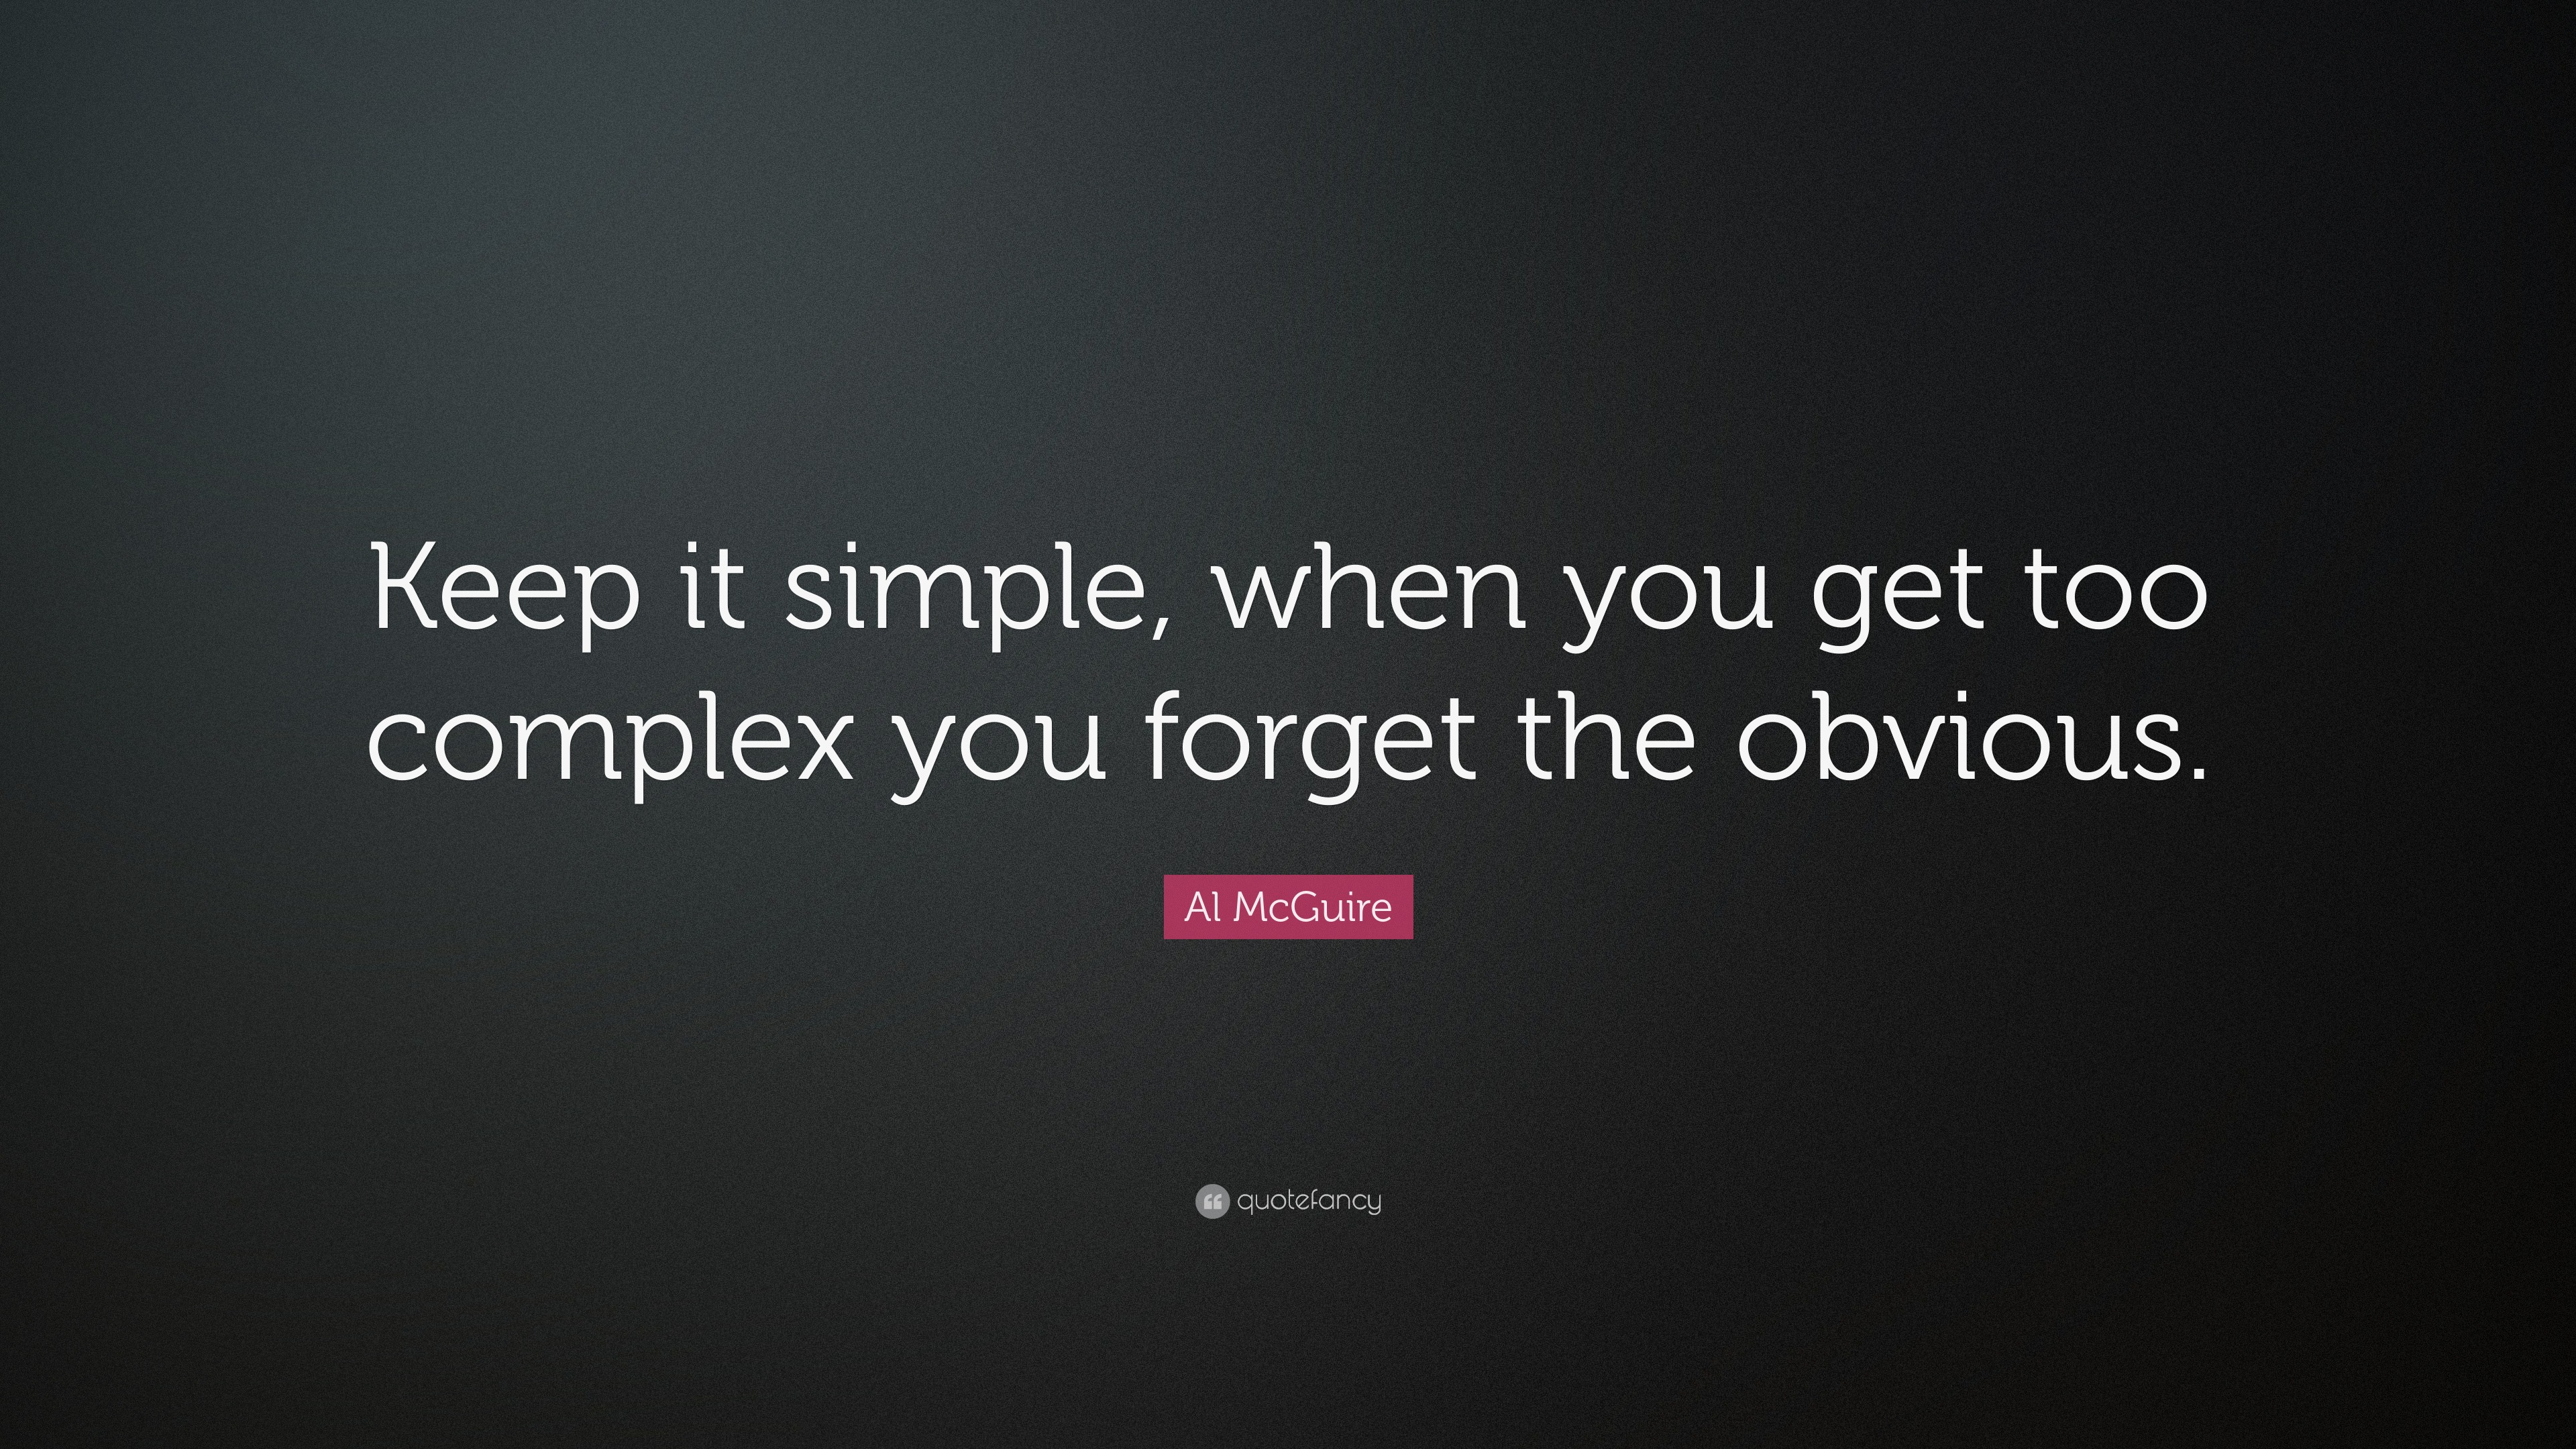 Al McGuire Quote   Keep  it simple  when you get too 